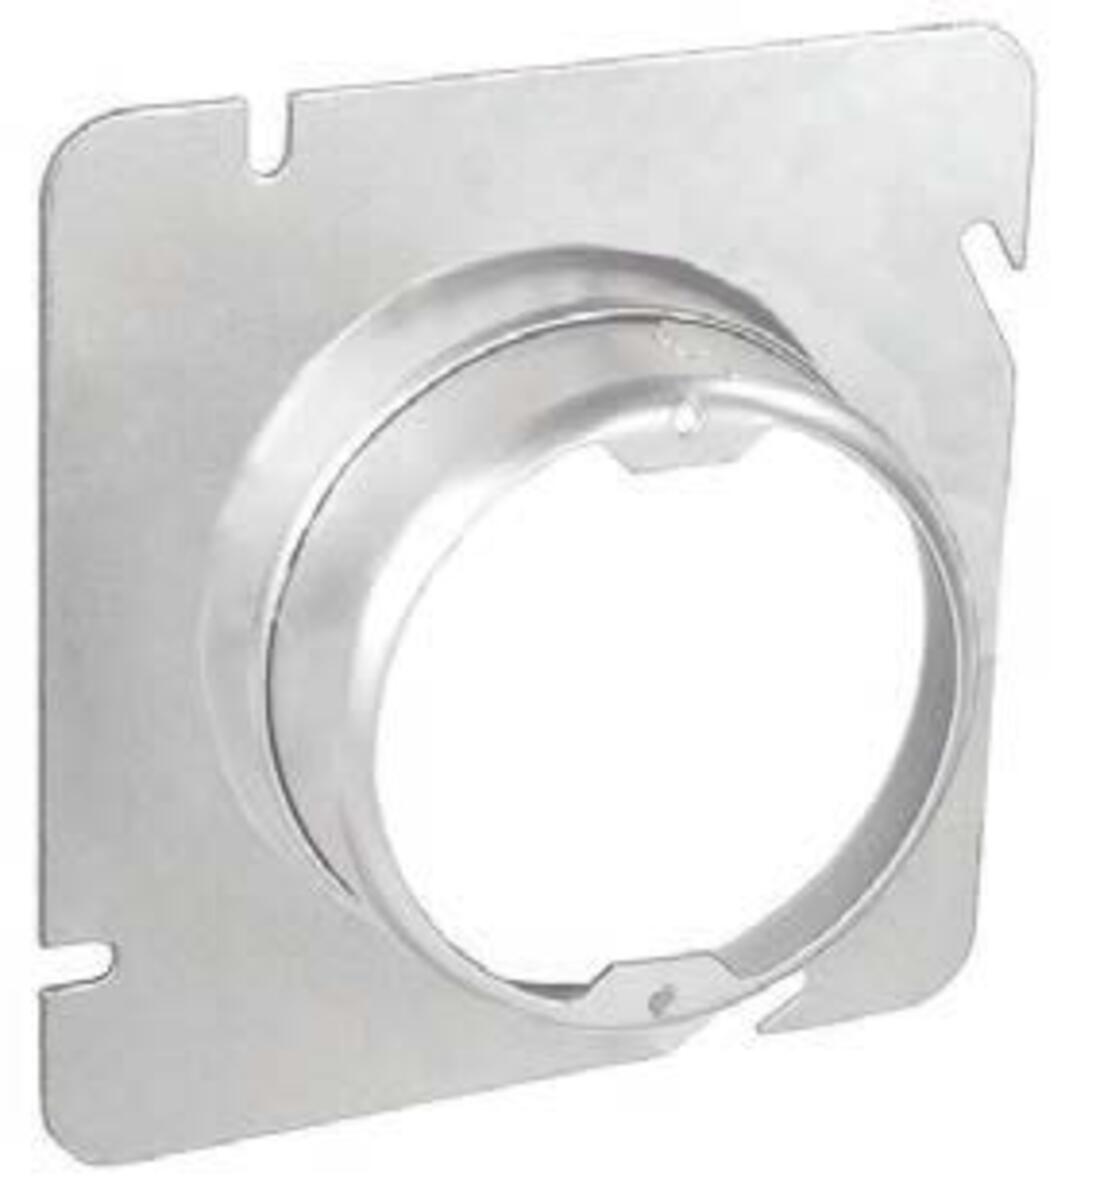 4-11/16" Square To 3-1/2" Round Adjustable Device Ring - Raised 3/4" To 1-1/2"